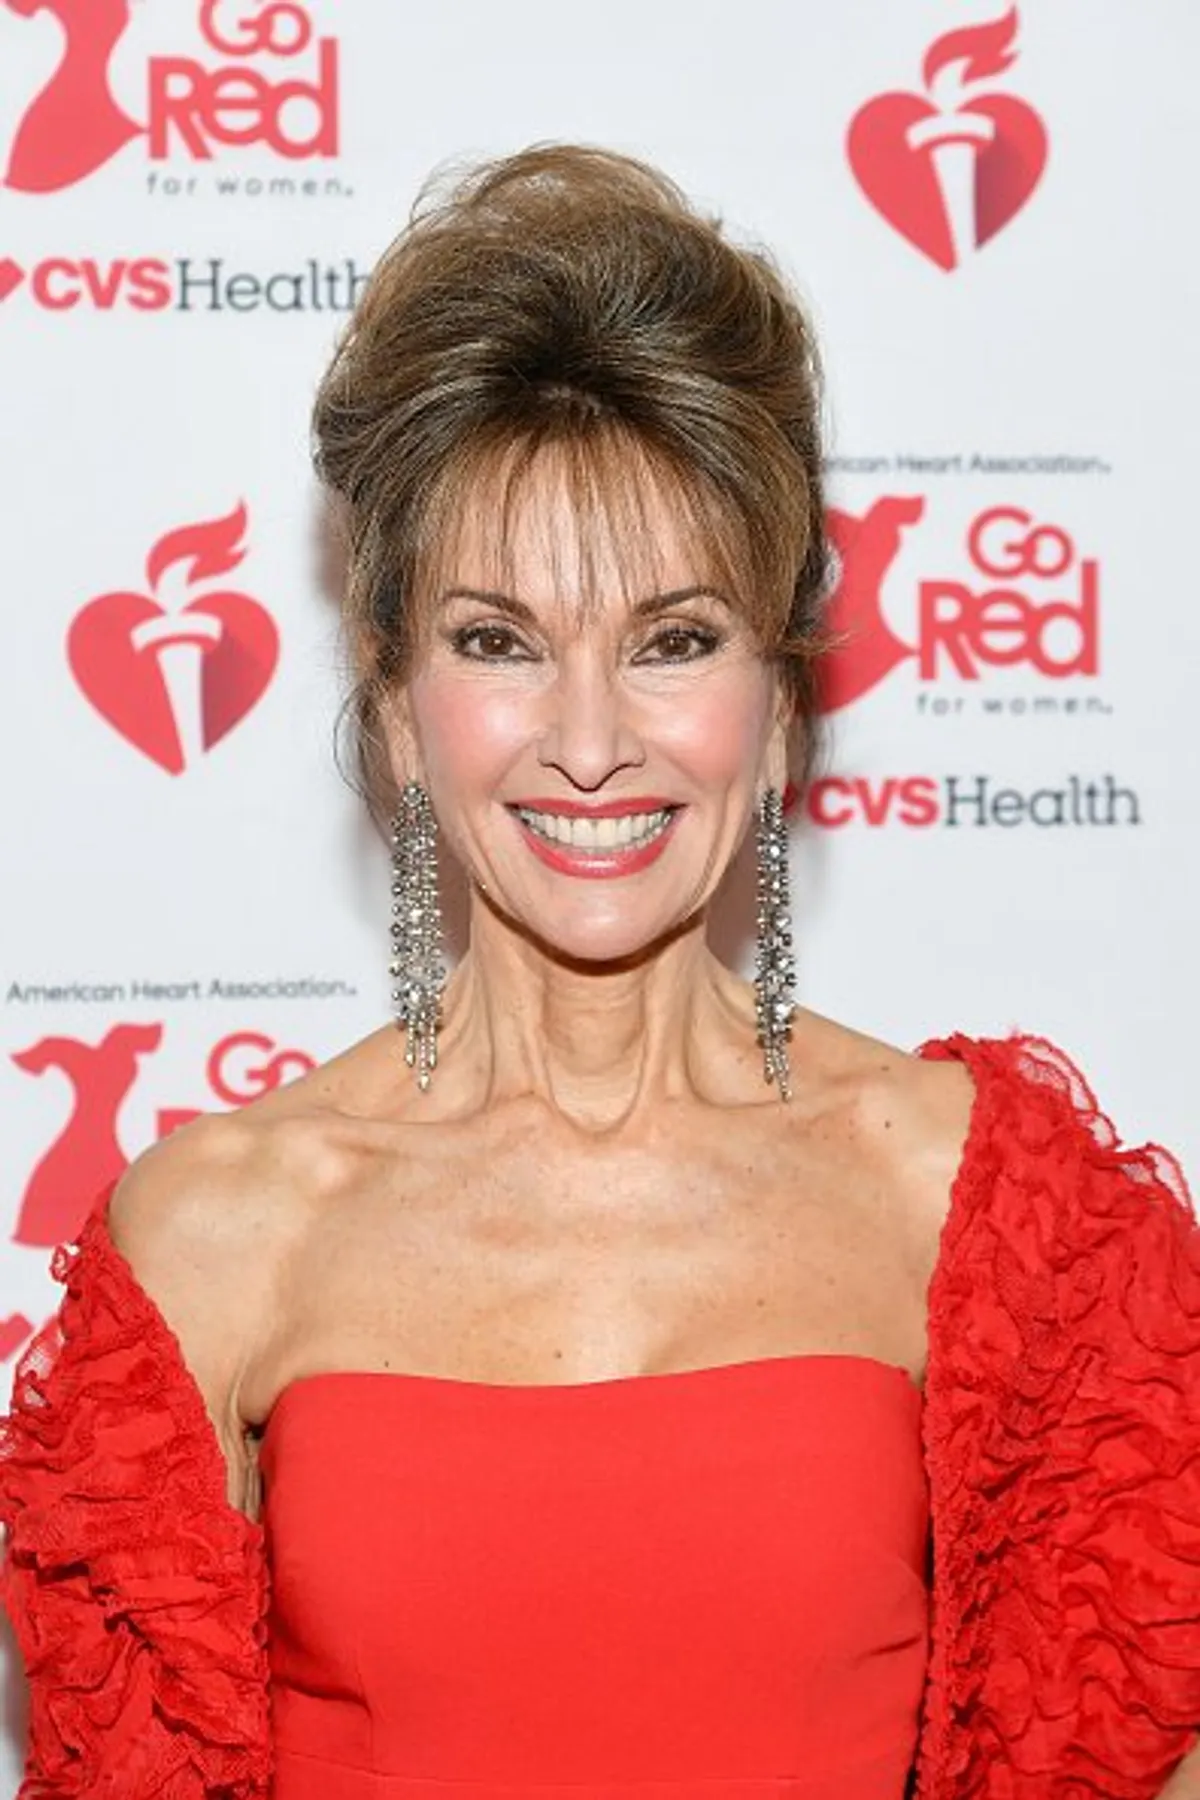 Susan Lucci at Hammerstein Ballroom in New York City on February 5, 2020 | Photo: Getty Images